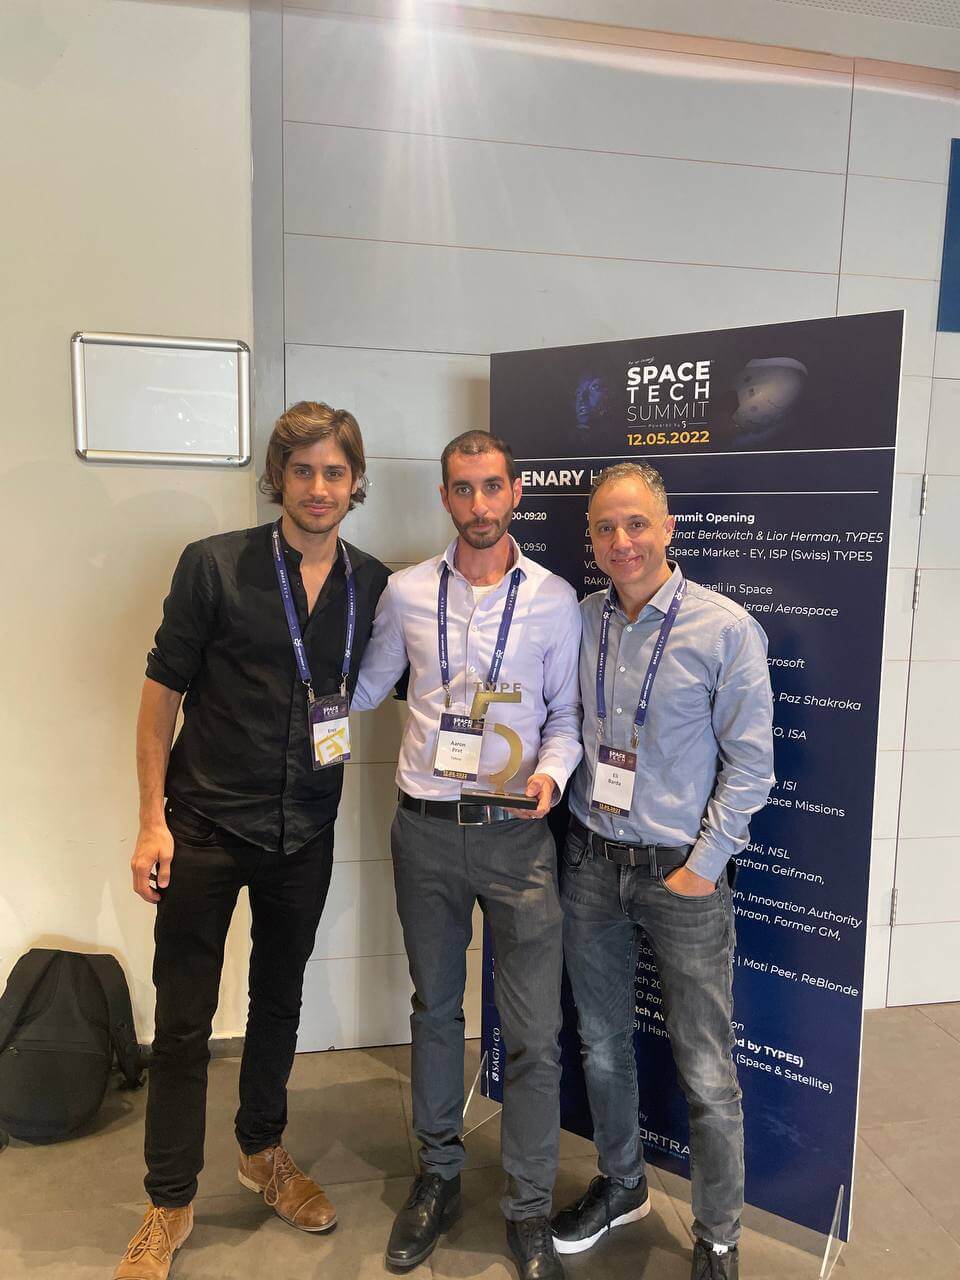 From left to right: Erez Bader, Space Manager EY Silicon Valley, Aharon Perat Menchal and the founder of the Tahiro Space Company, Eli Barda, Partner at EY Israel and Director of the Space Sector